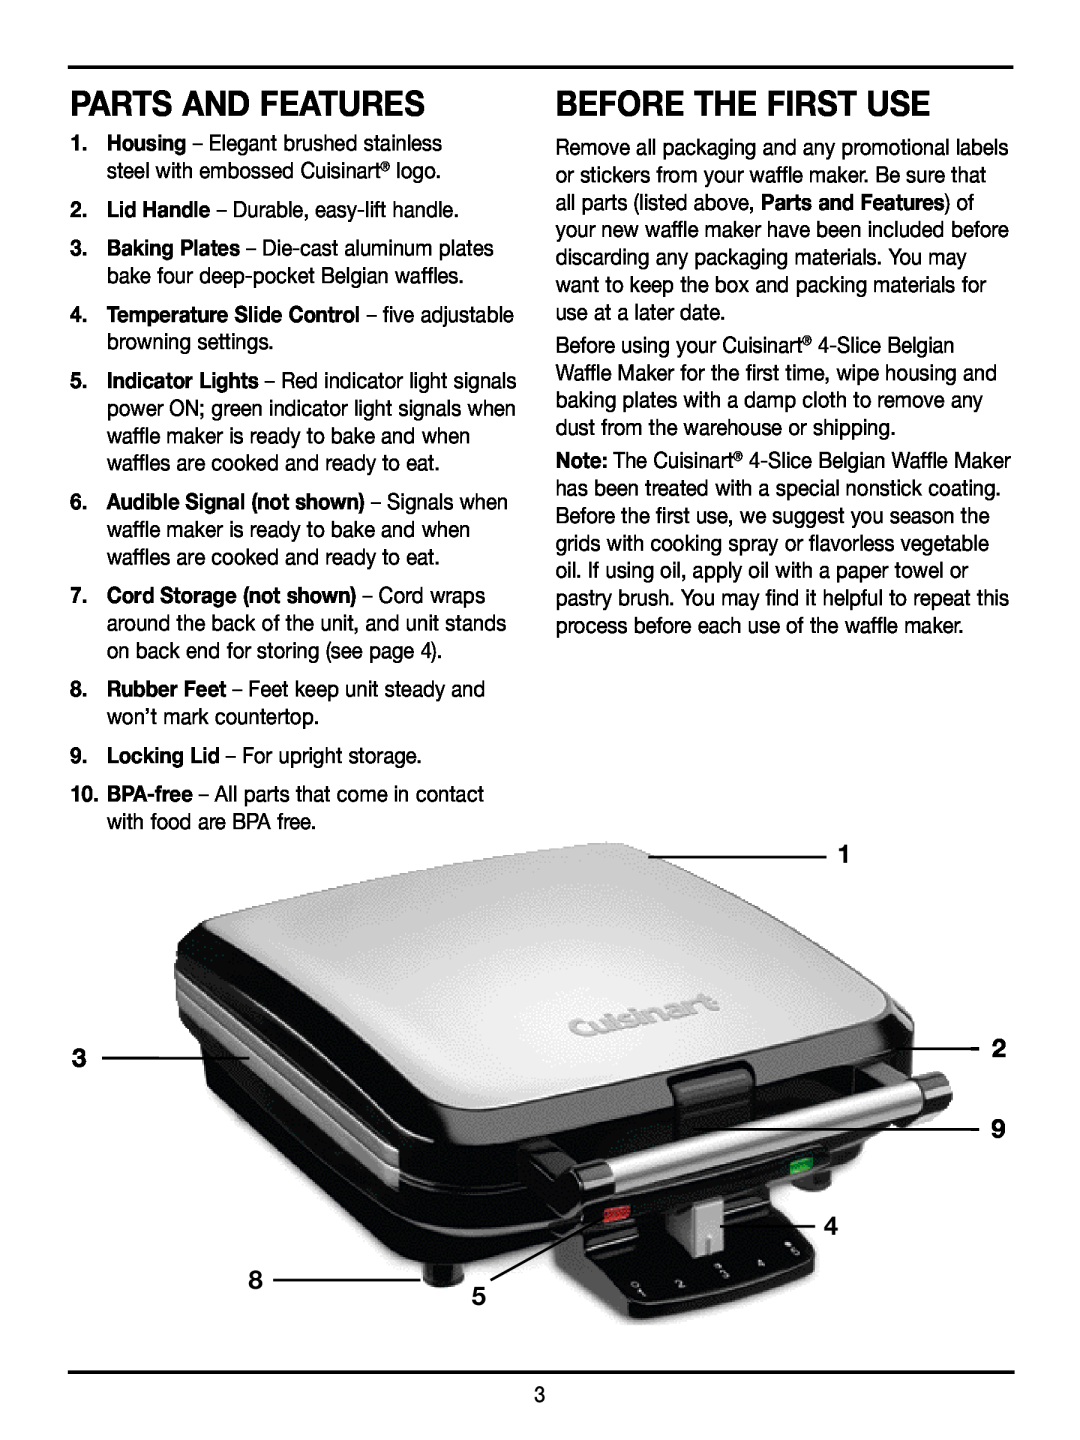 Cuisinart WAF-100 manual Parts And Features, Before The First Use, 1 2 9, Lid Handle - Durable, easy-lifthandle 